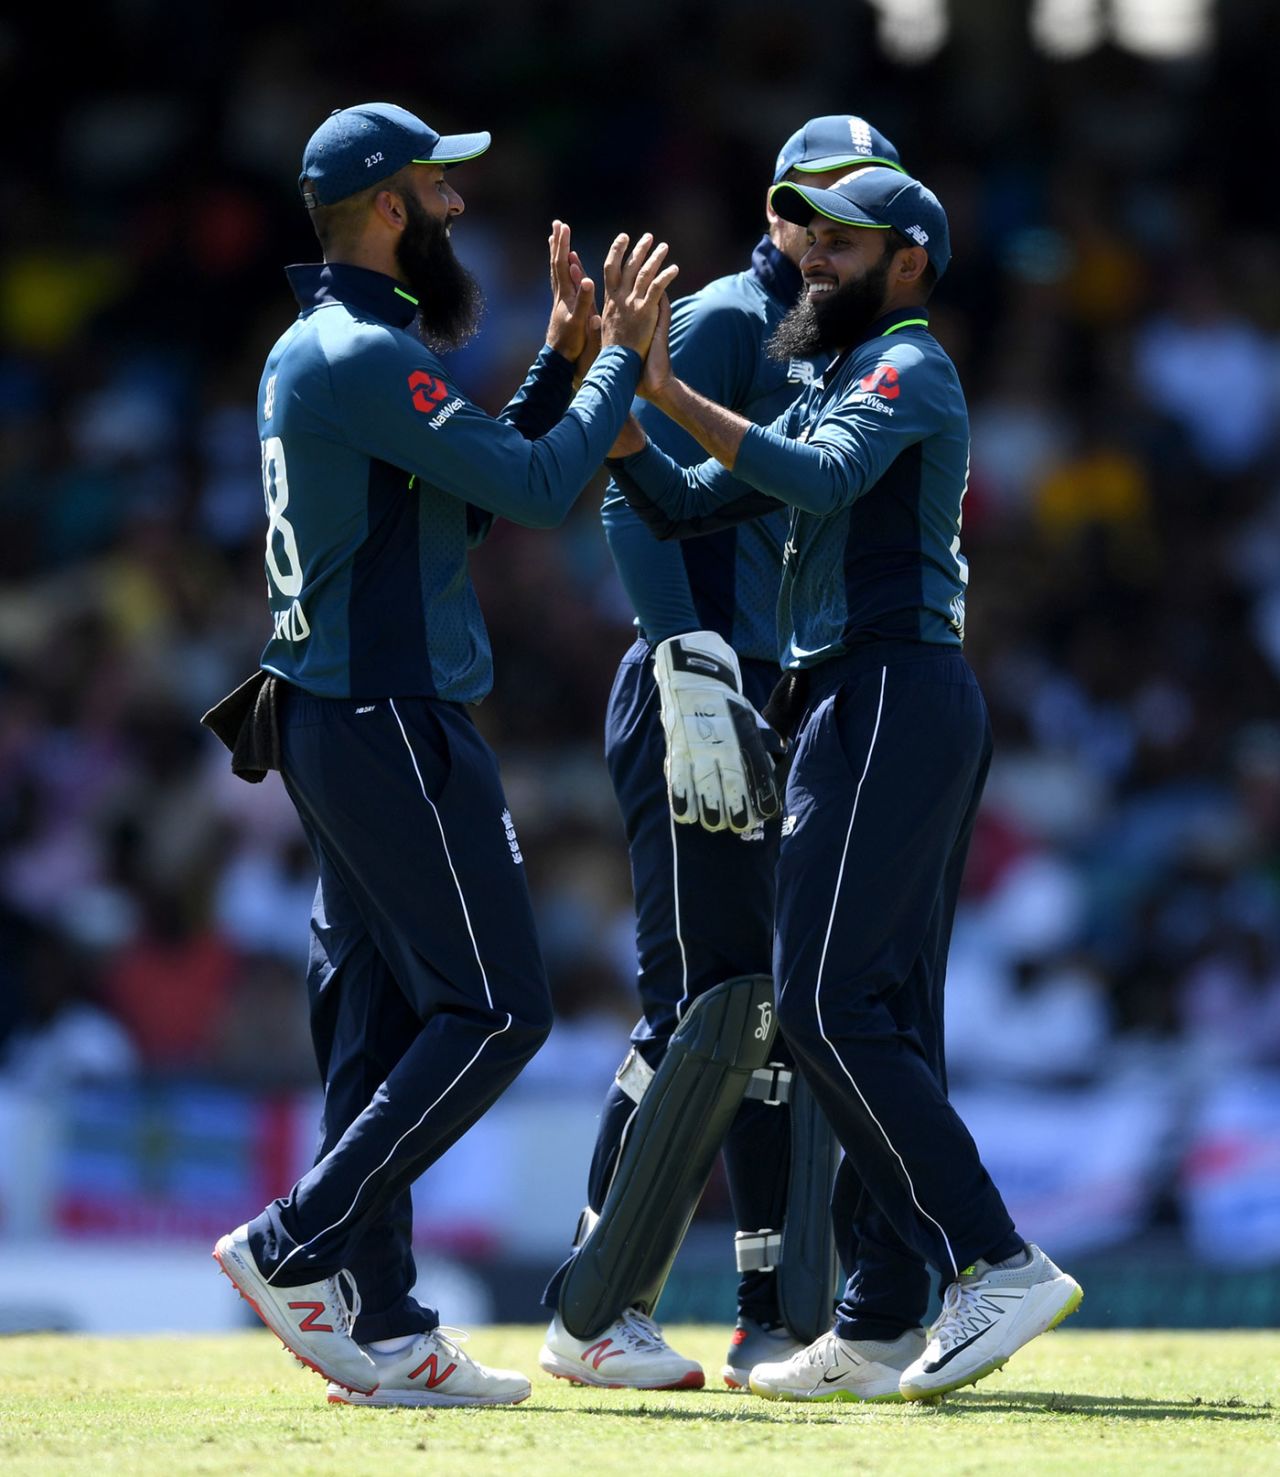 Moeen Ali and Adil Rashid celebrate another breakthrough, West Indies v England, 2nd ODI, Barbados, February 22, 2019